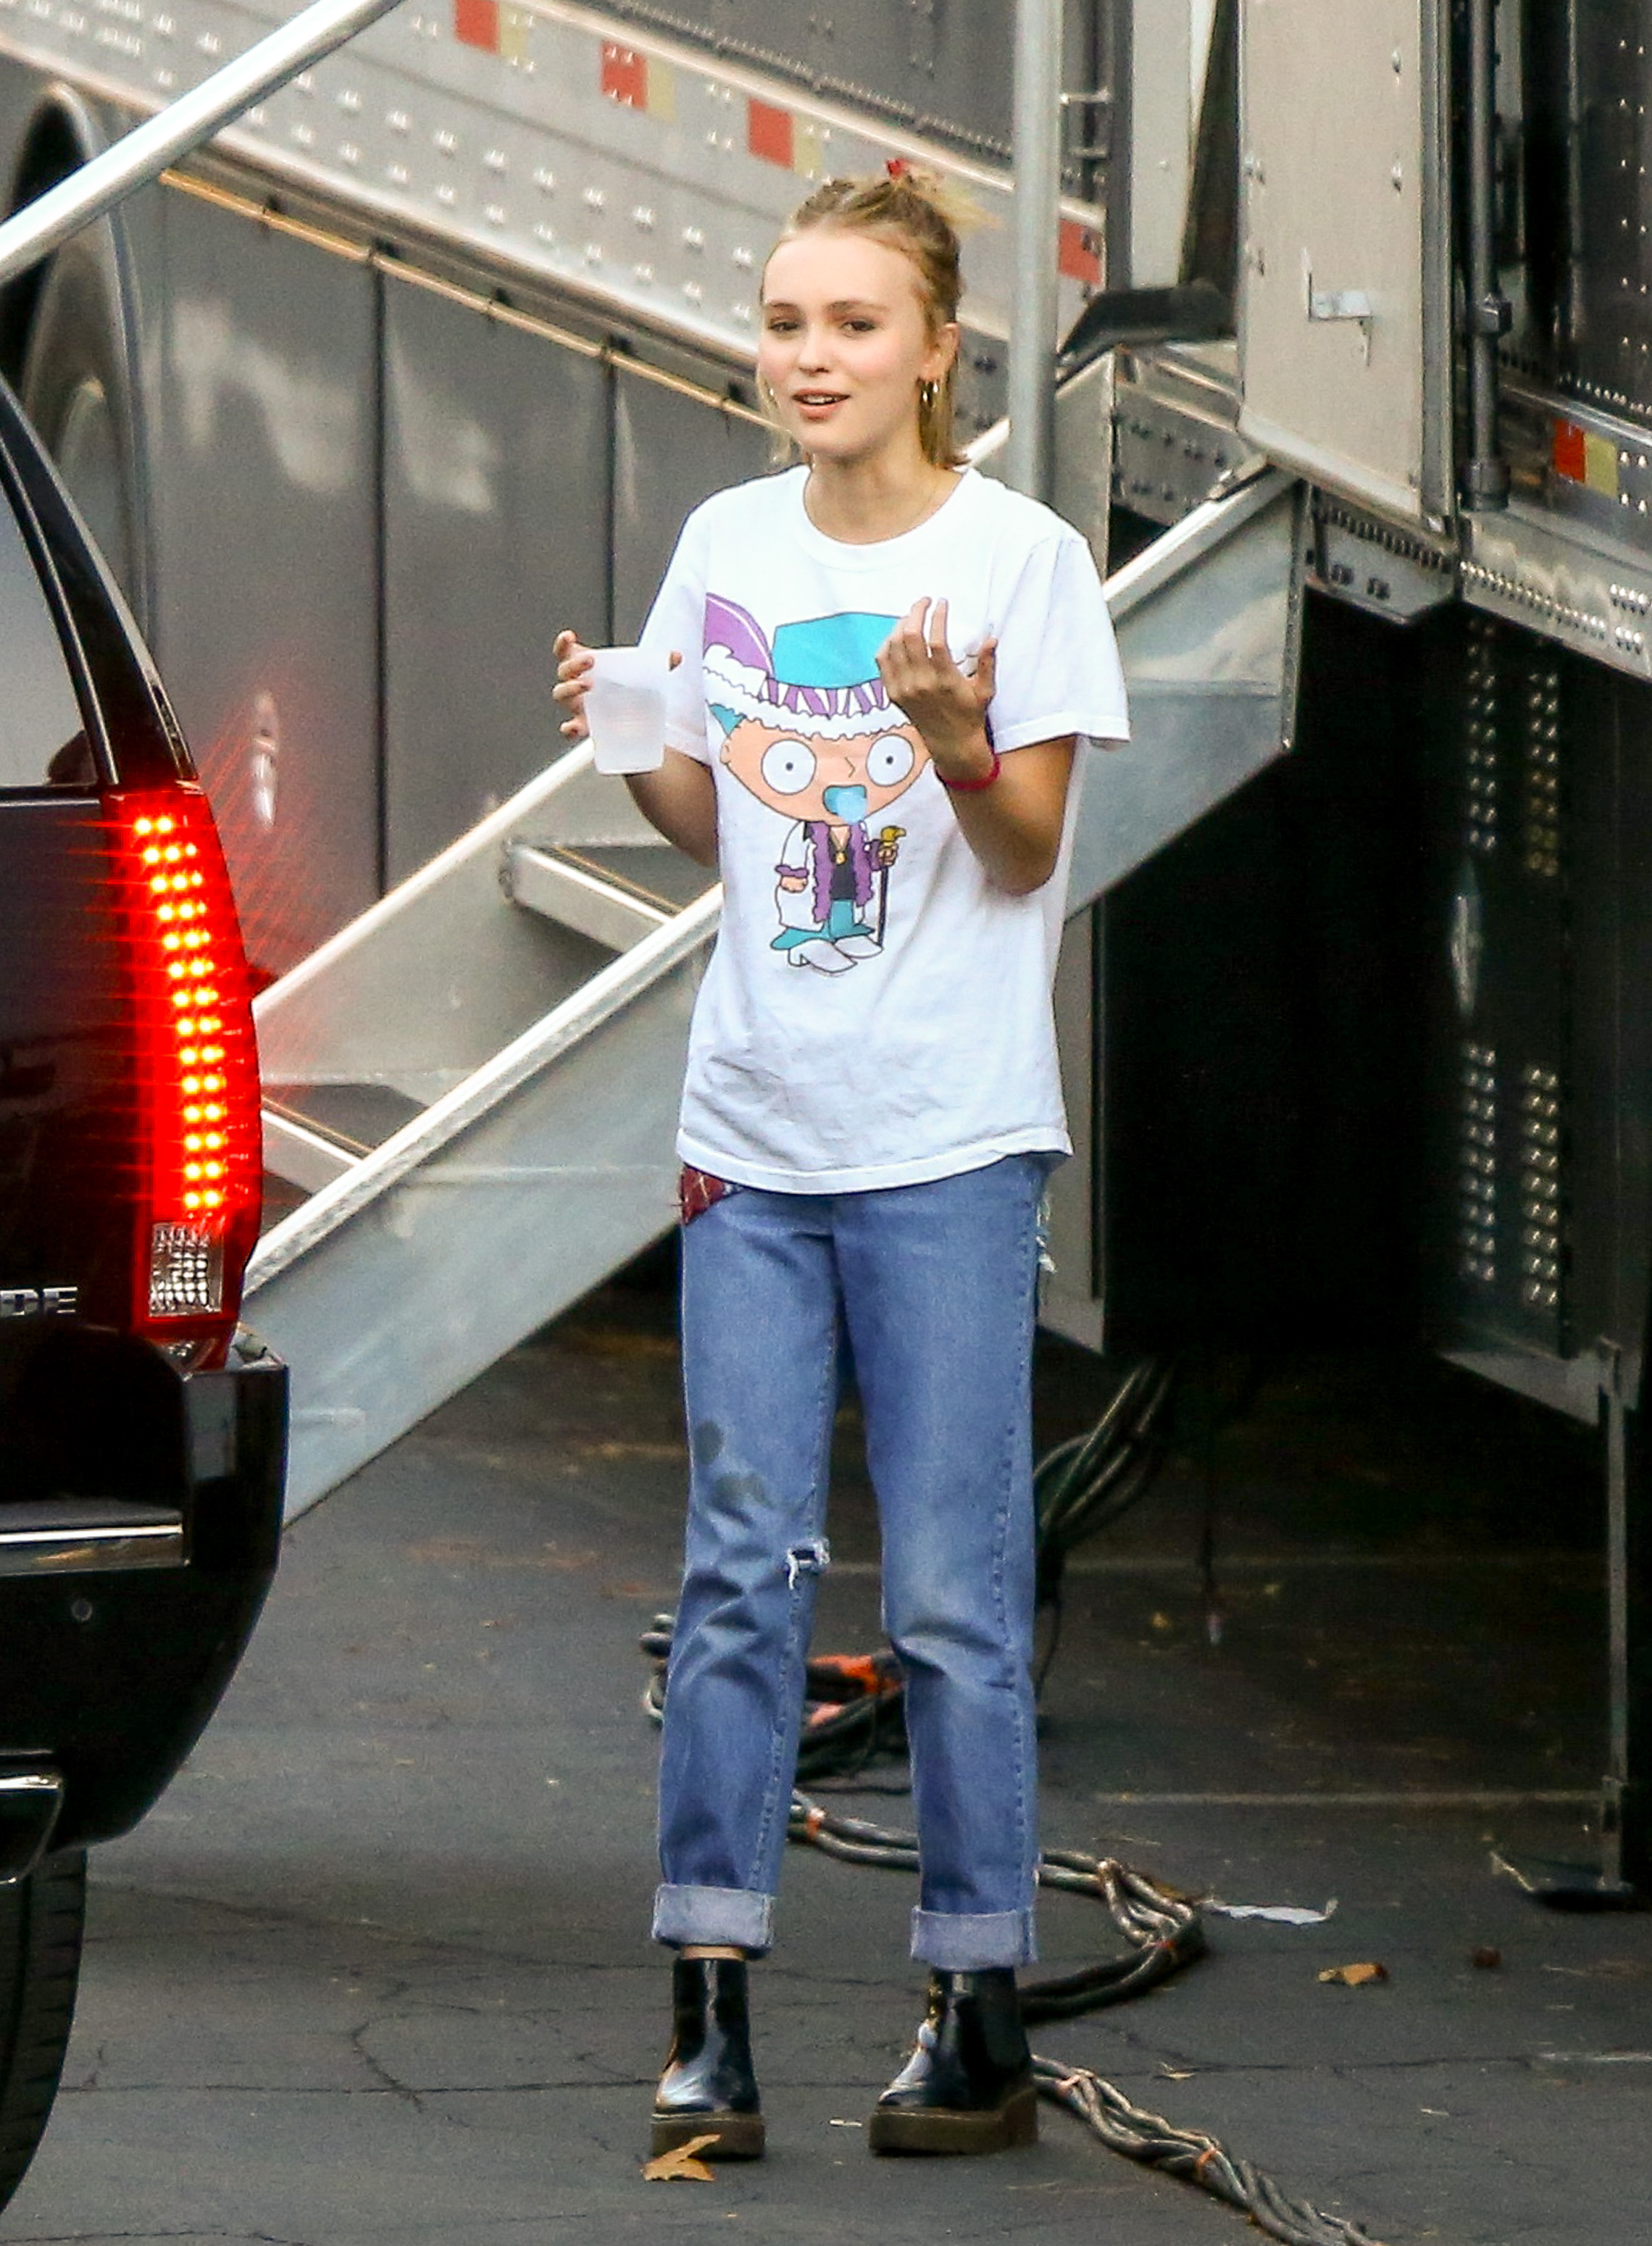 Lily-Rose Depp at the "Yoga Hosers" set in Los Angeles, California on September 10, 2014 | Source: Getty Images